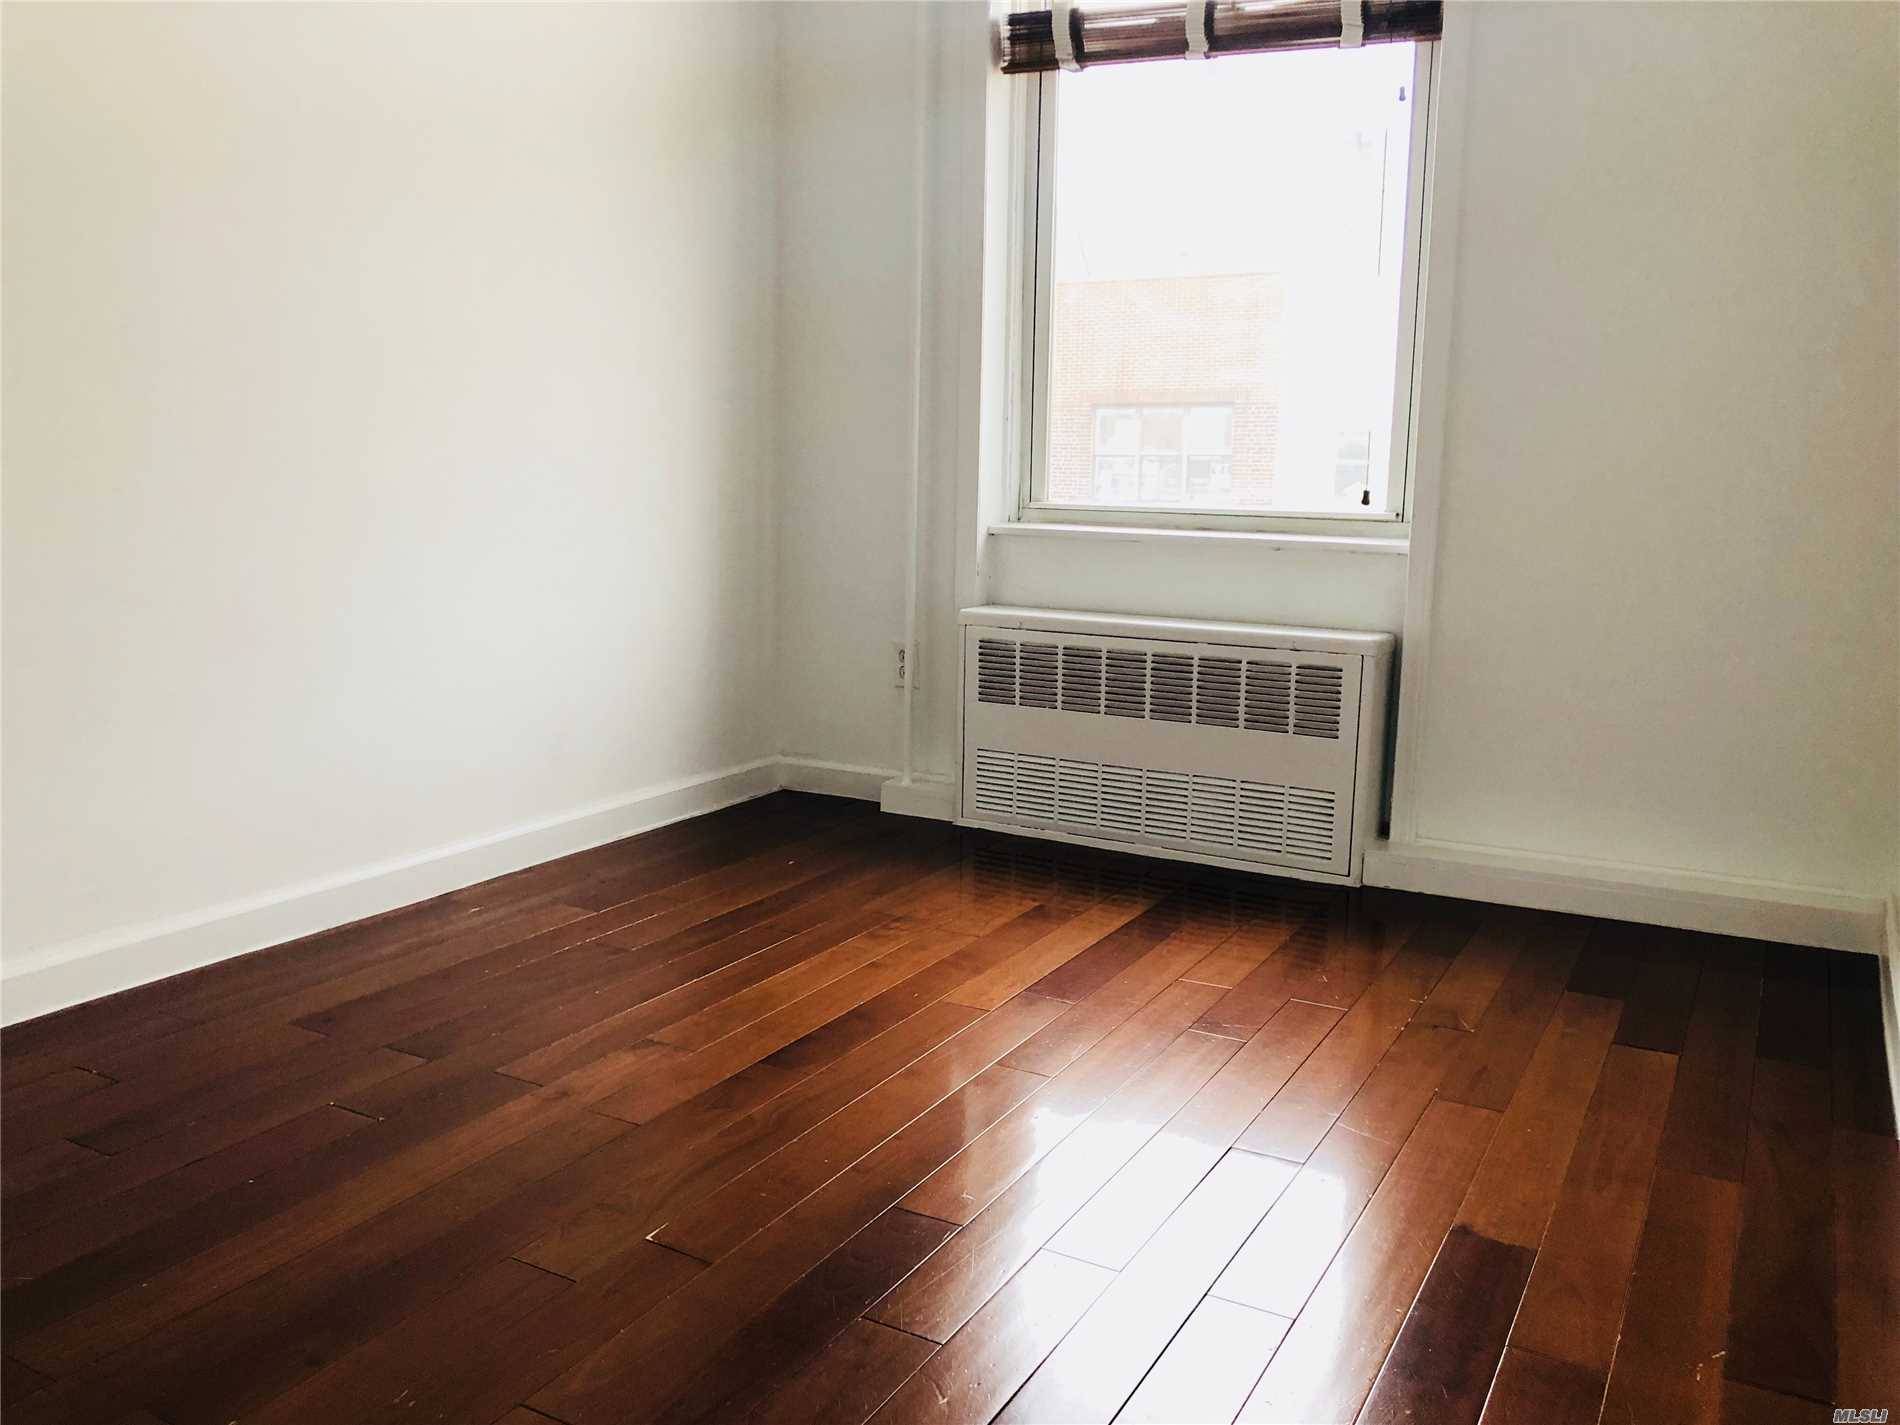 Large Four Bedroom Second Floor Walk Up Apartment In The East Williamsburg Section.